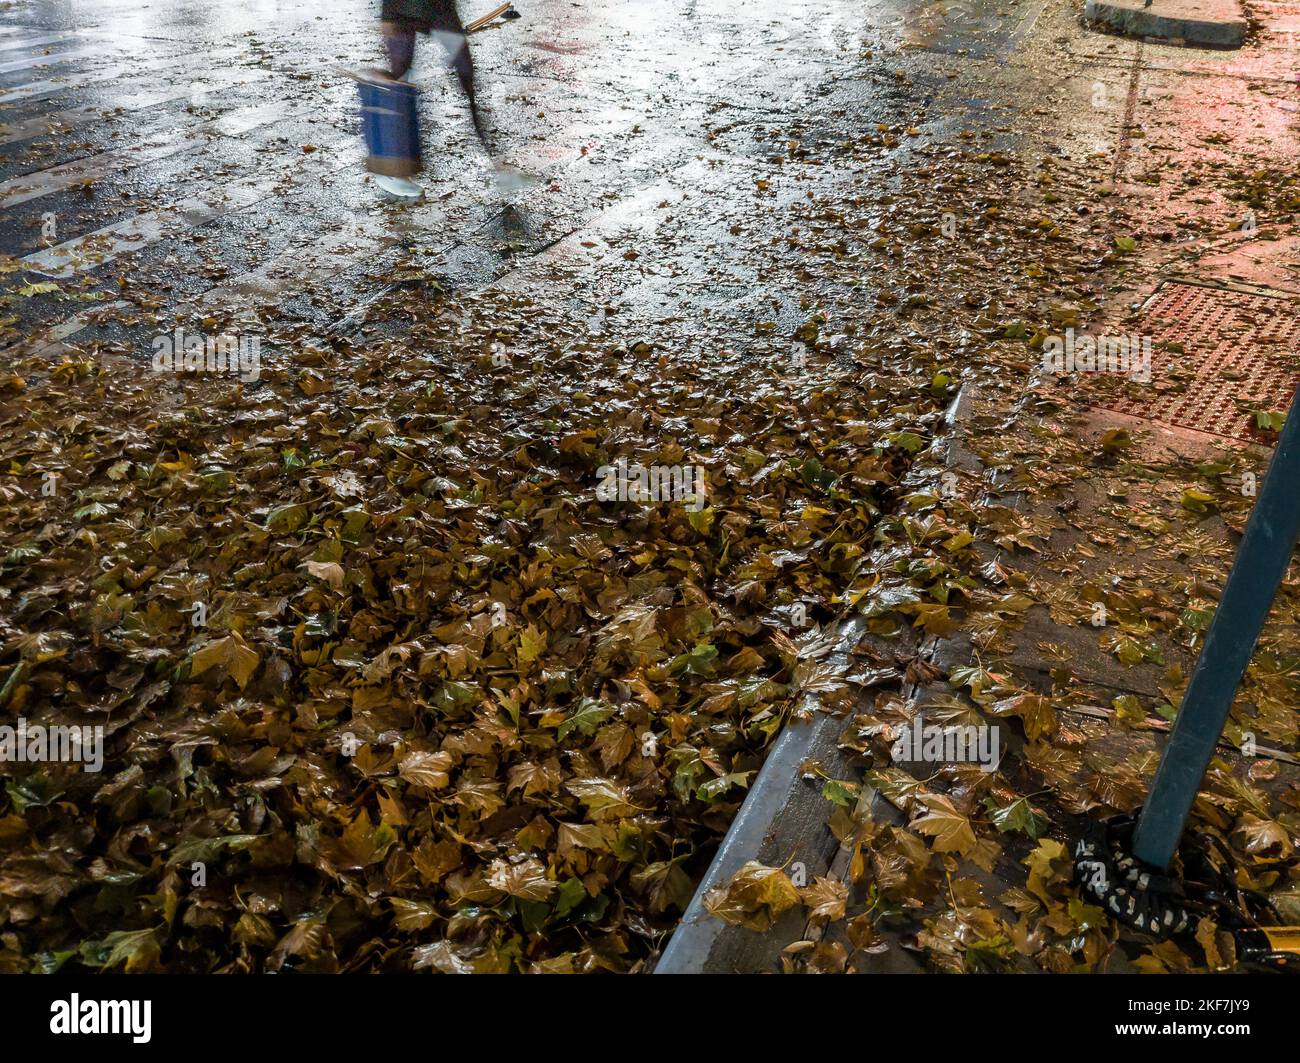 Autumn leaves litter the streets after the remains of Hurricane Nicole passes through New York in Chelsea, on Friday, November 11, 2022. The city is making an effort to clean catch basins and storm drains to prevent localized flooding. (© Richard B. Levine) Stock Photo